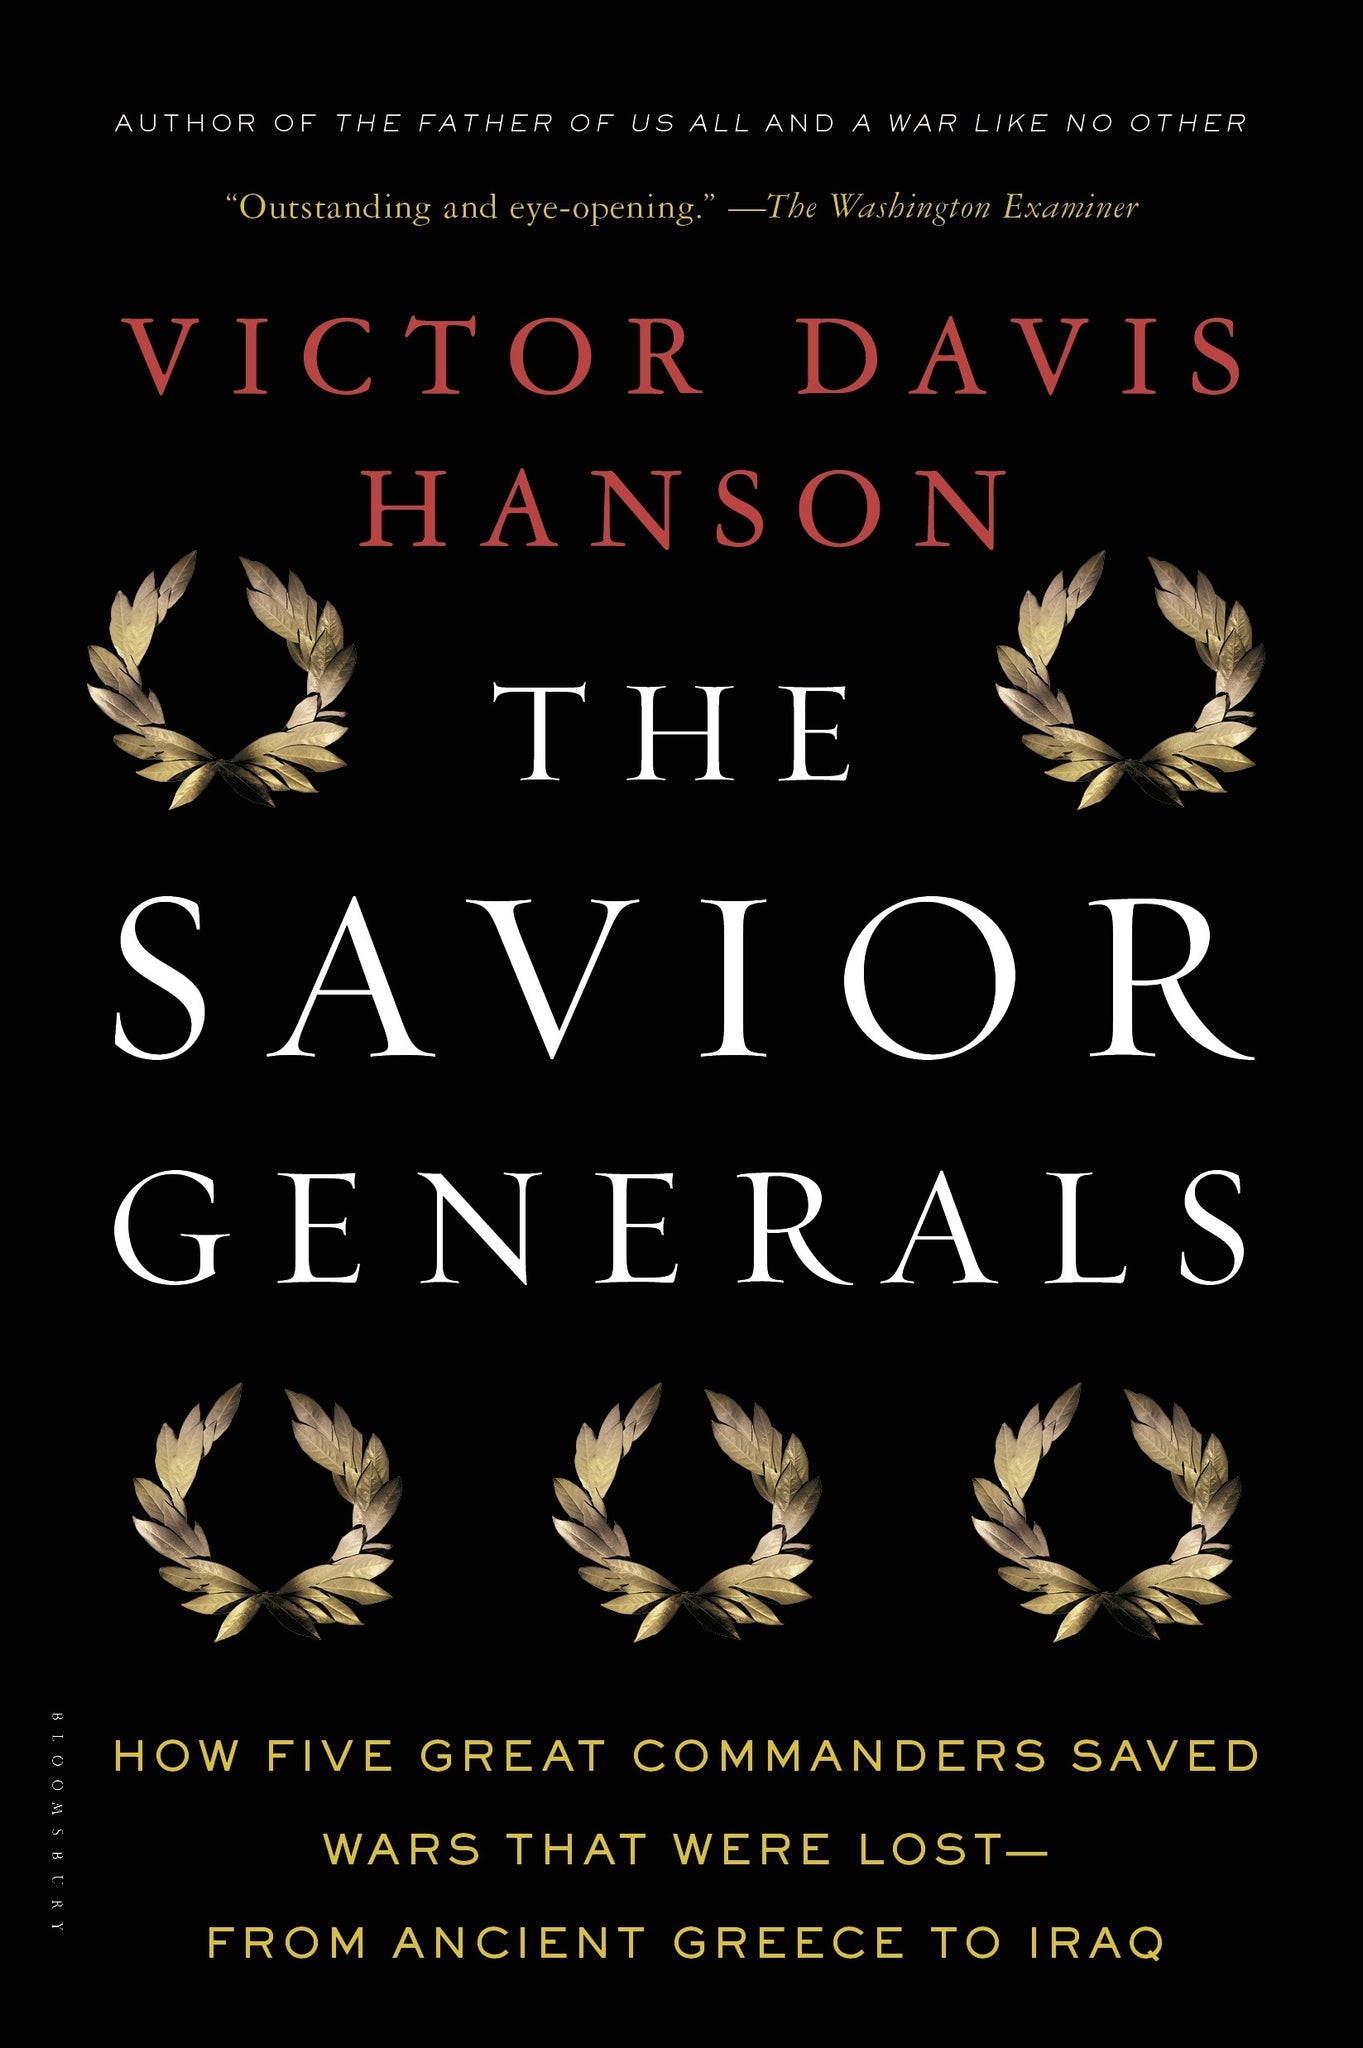 The Savior Generals : How Five Great Commanders Saved Wars That Were Lost - From Ancient Greece to Iraq